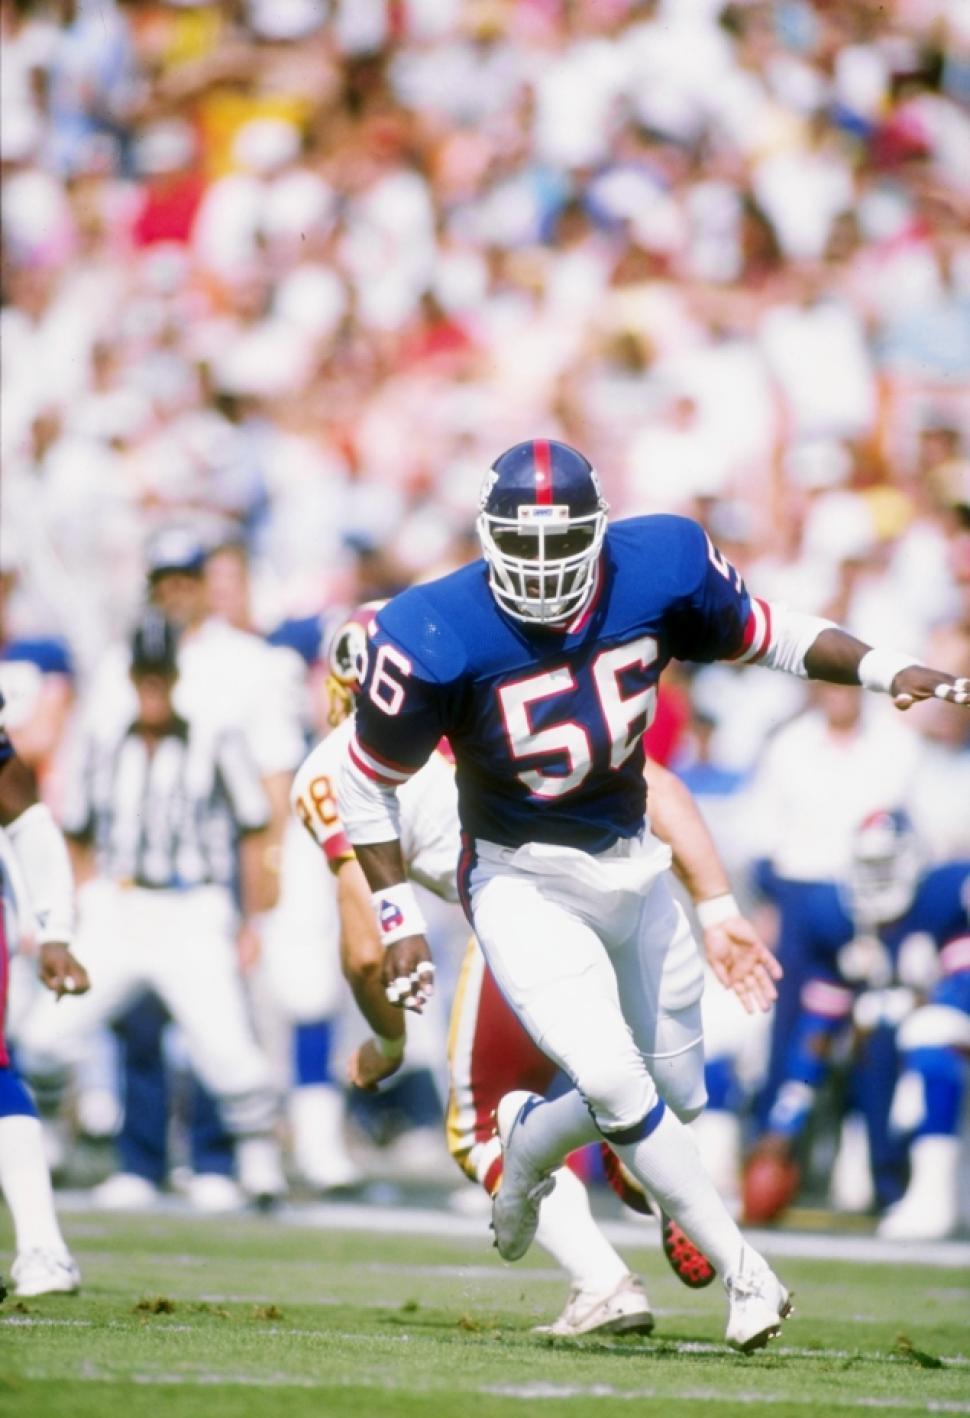 New York Giants 366  Wallpaper Wednesday featuring Giants legend Lawrence  Taylor   Facebook